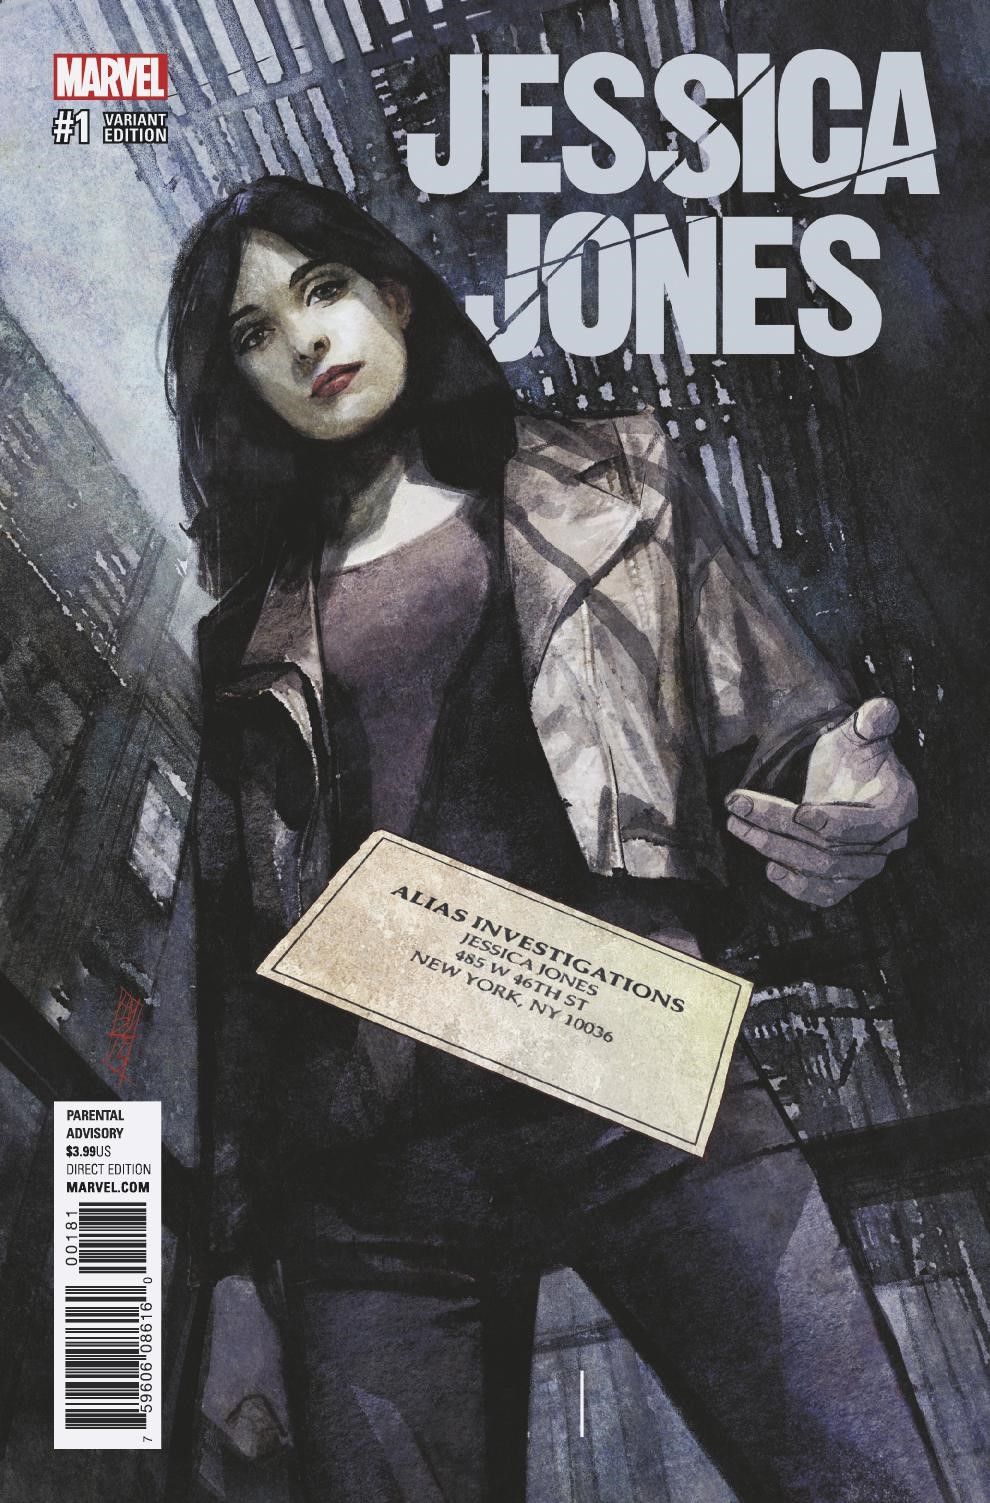 Jessica Jones #1 Preview: Jessica Goes to a Prison for Supervillains